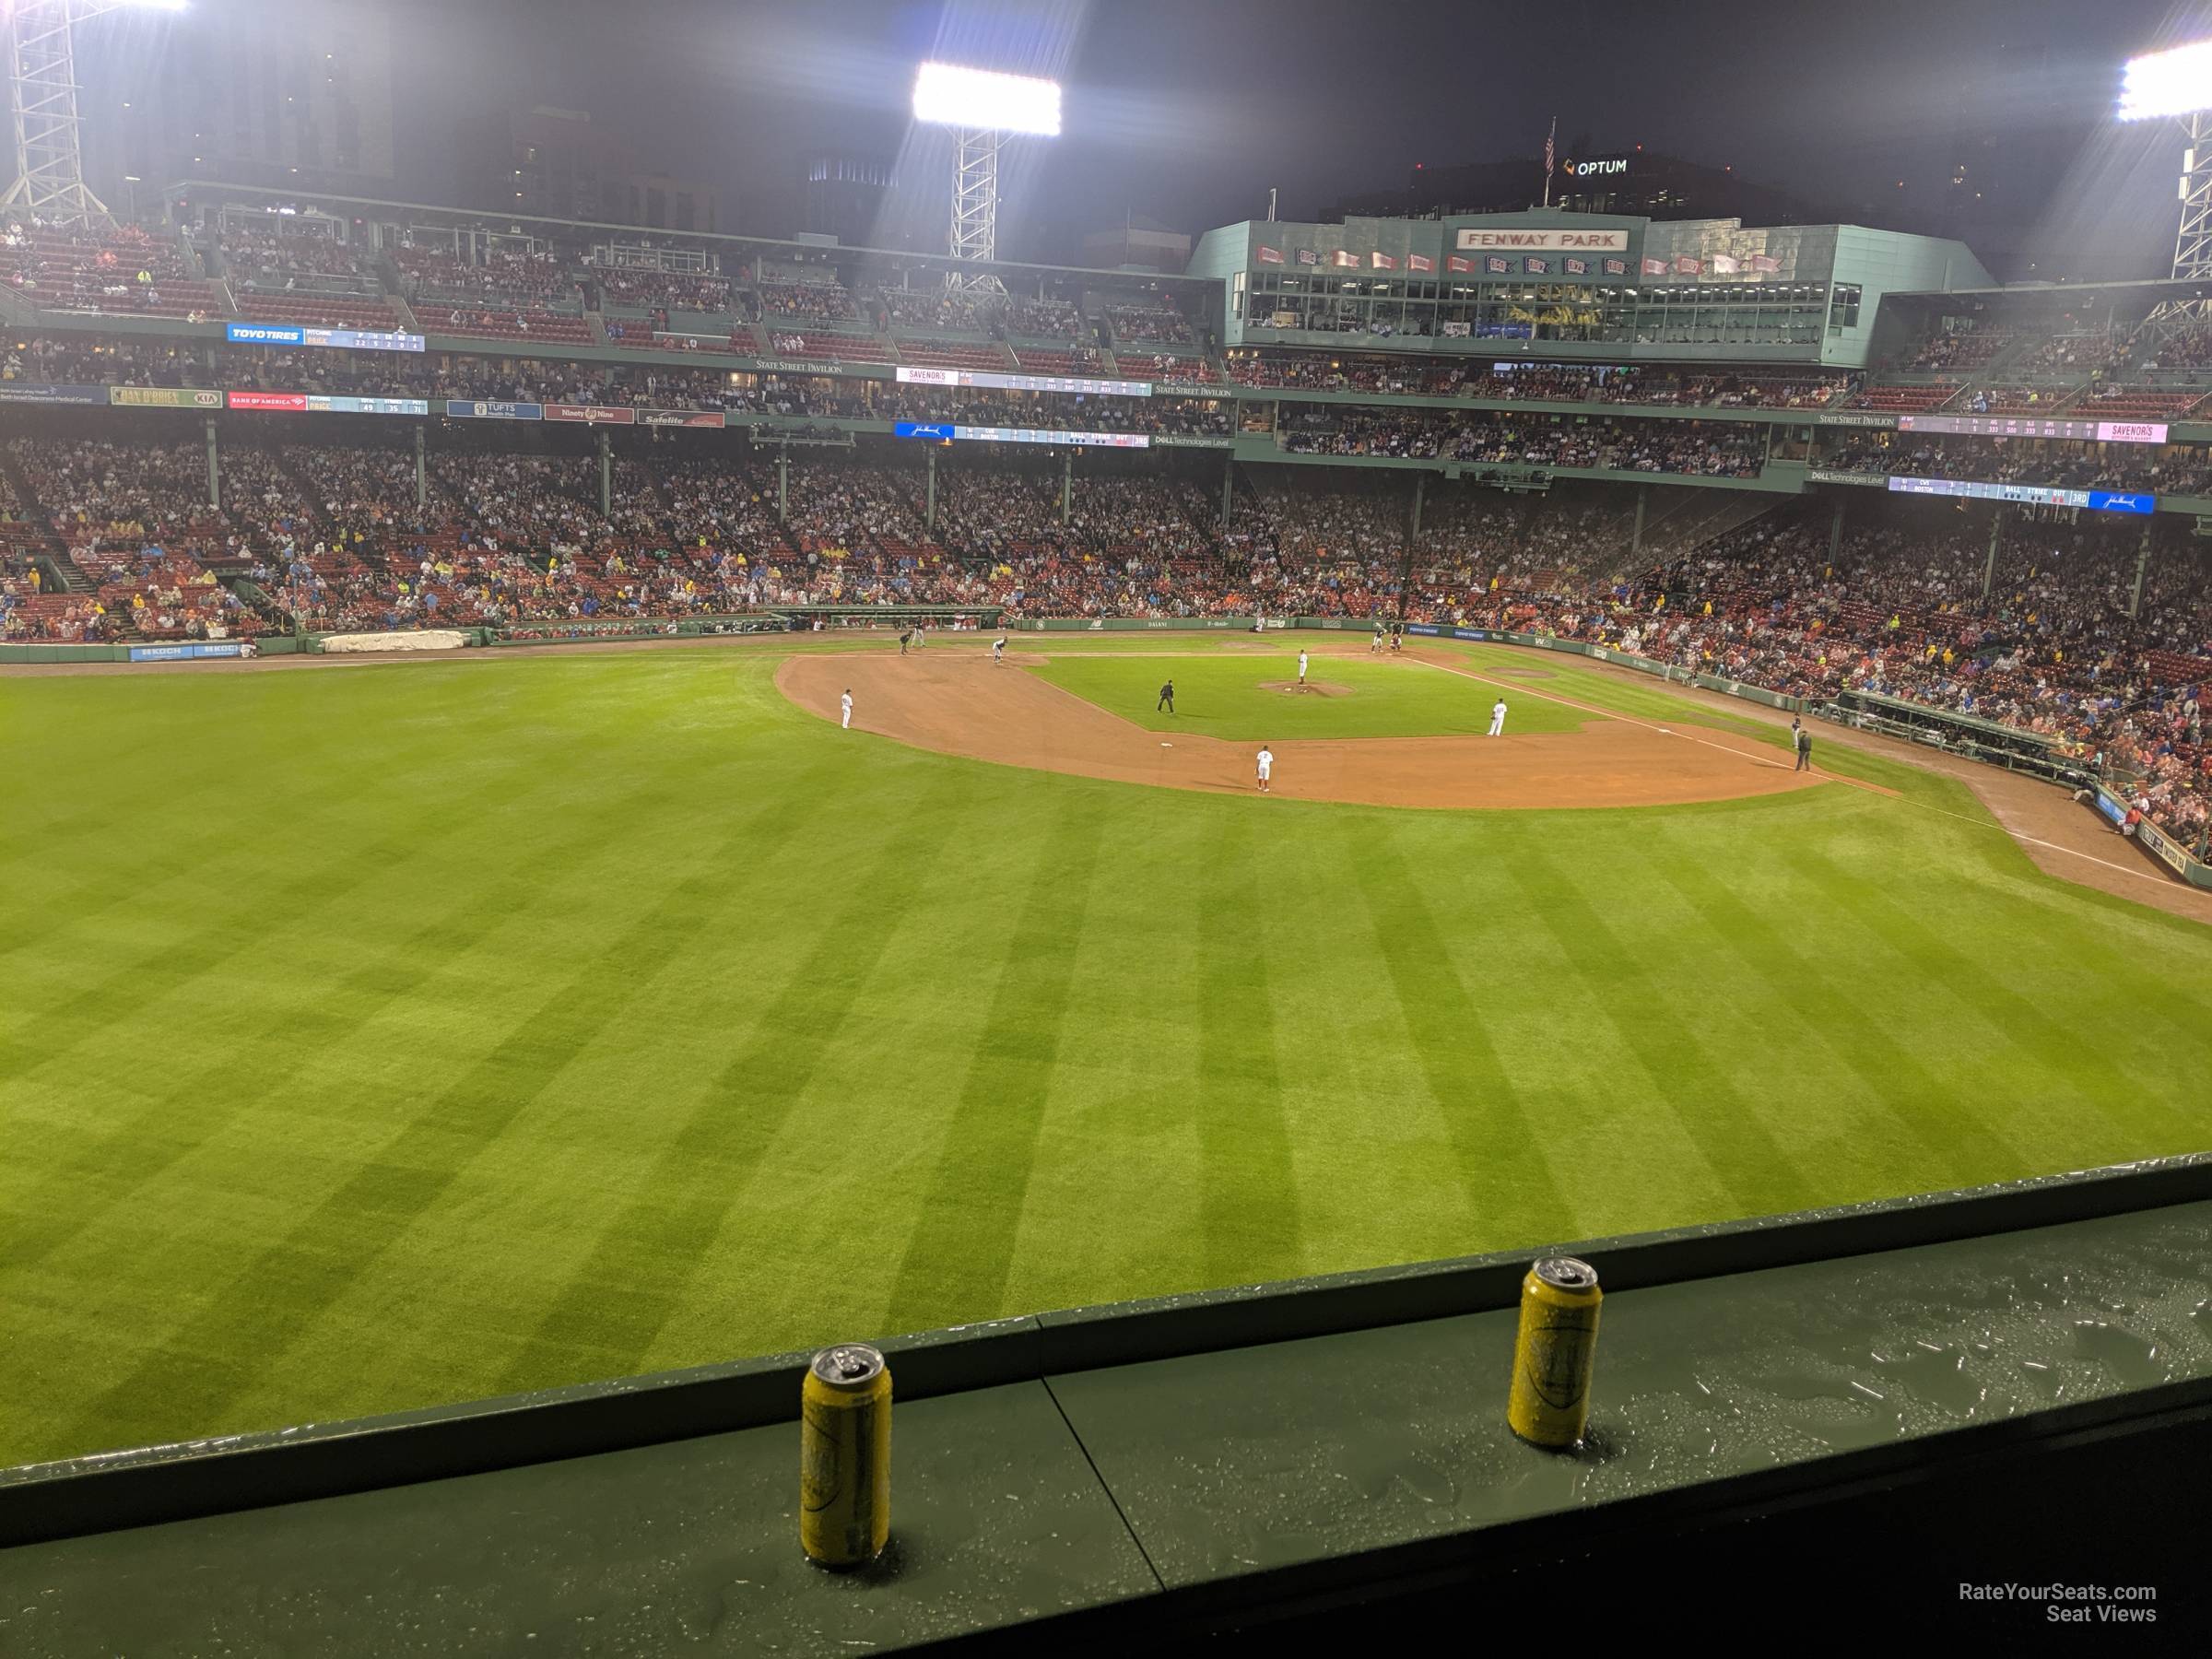 A Guide To Fenway Park's Green Monster Seats - Milwaukee Brewers vs Boston Red  Sox July 2022 